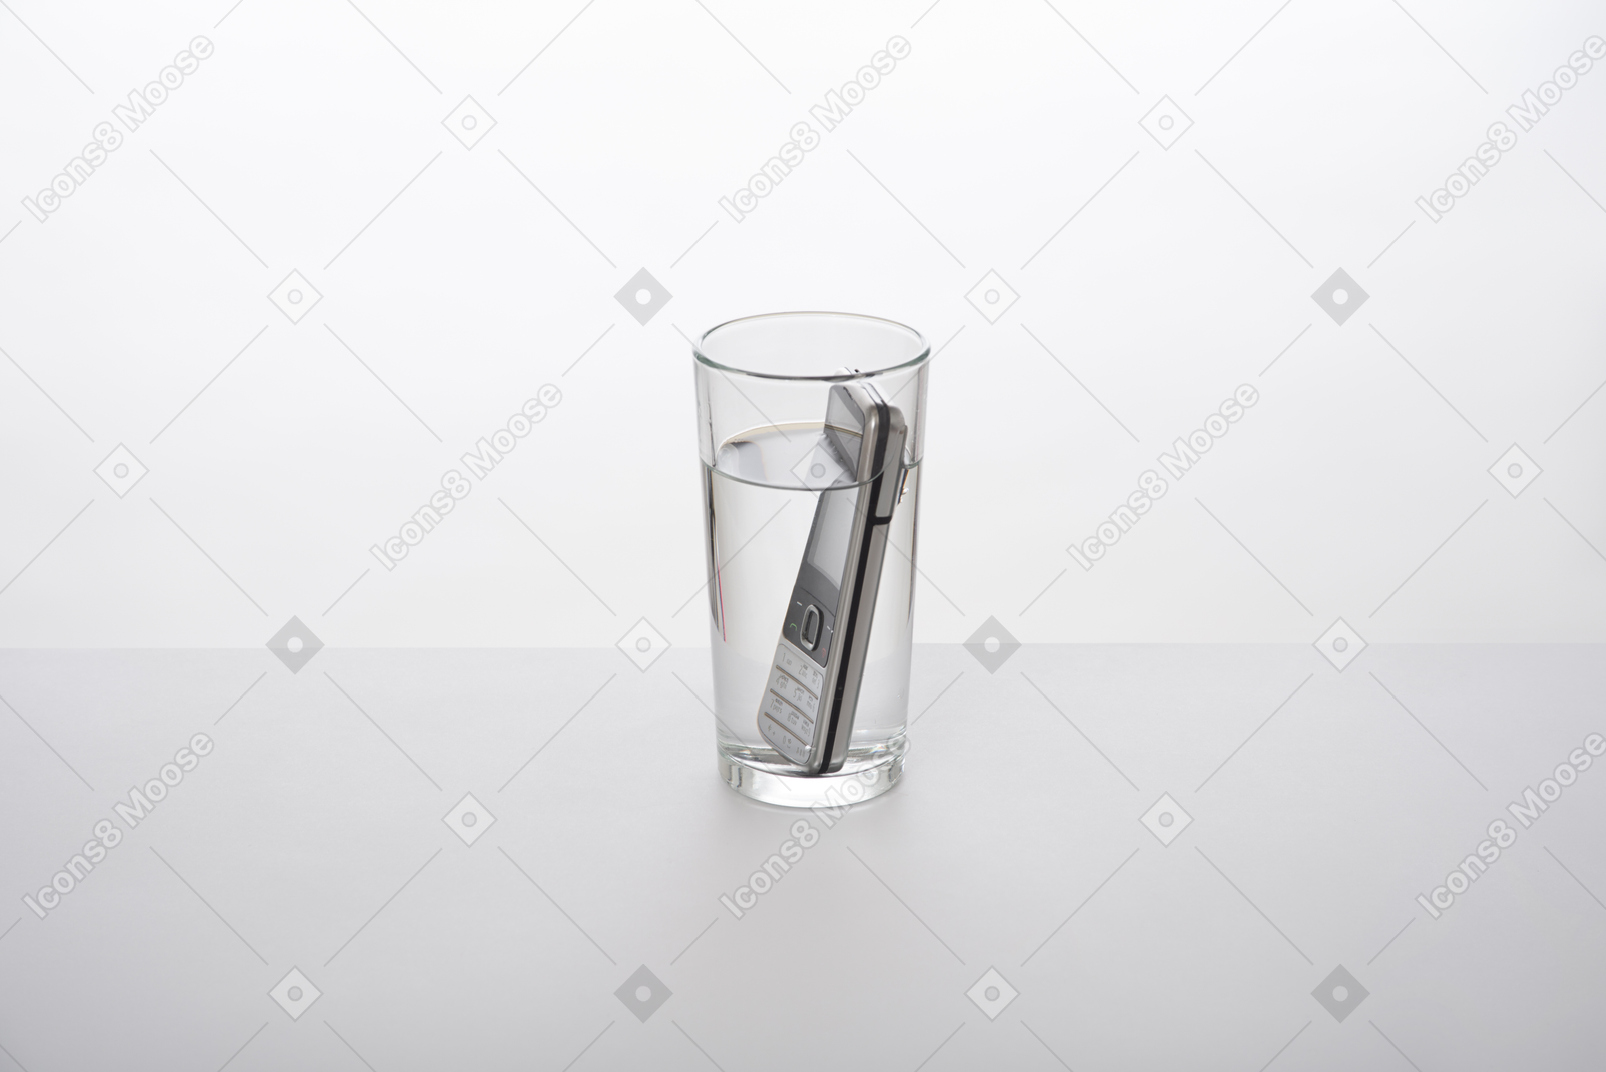 Cell phone in a glass of water